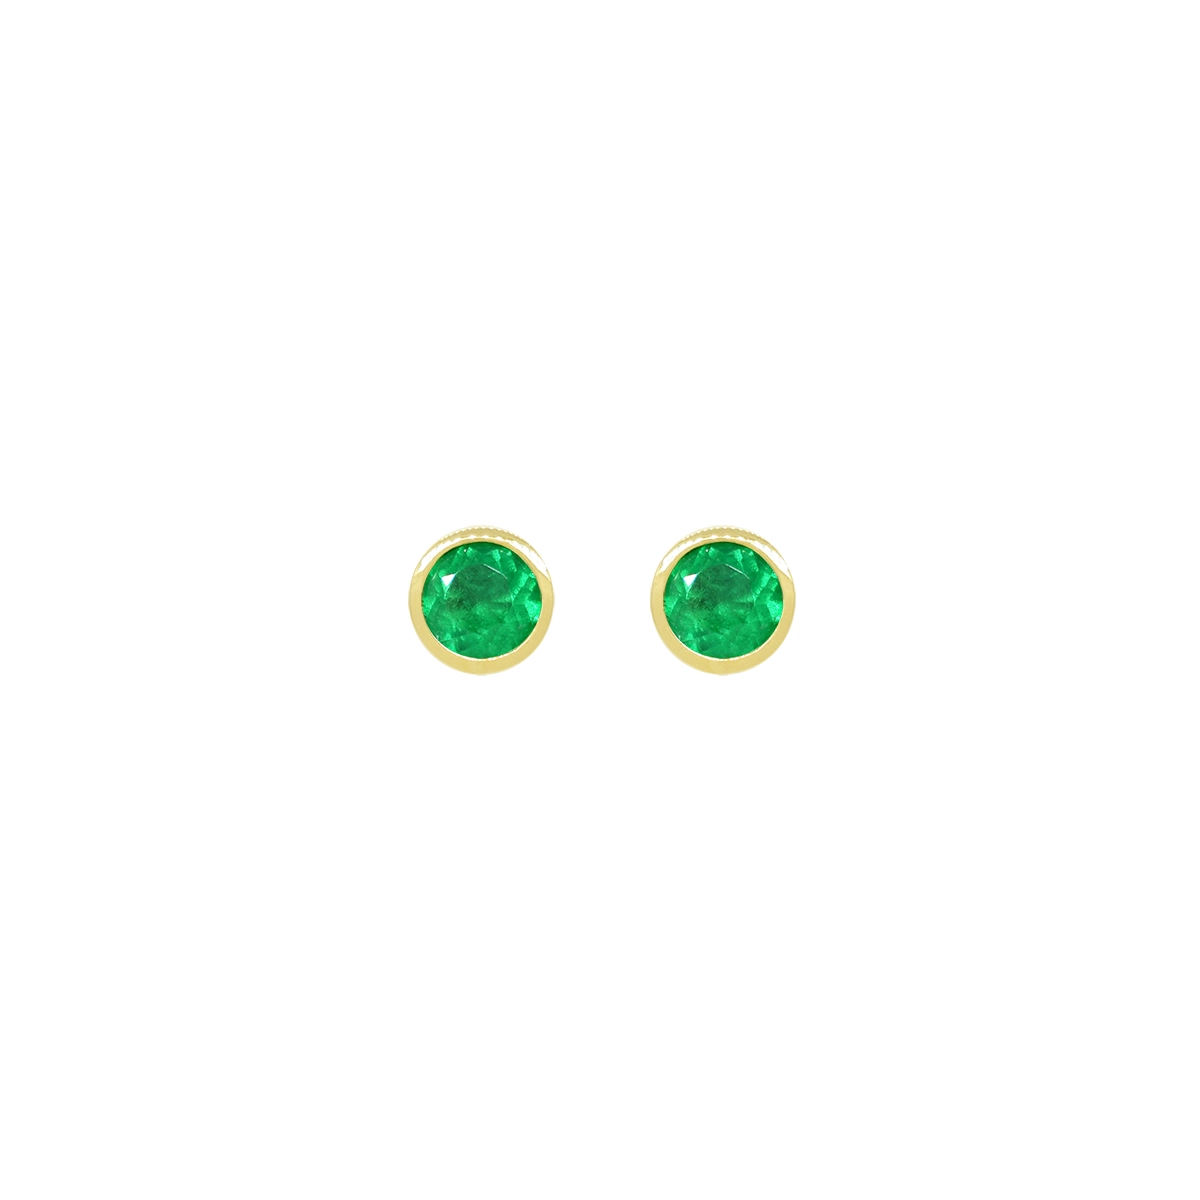 Small stud emerald earrings in 18K yellow gold classic bezel setting with 2 real Colombian emeralds